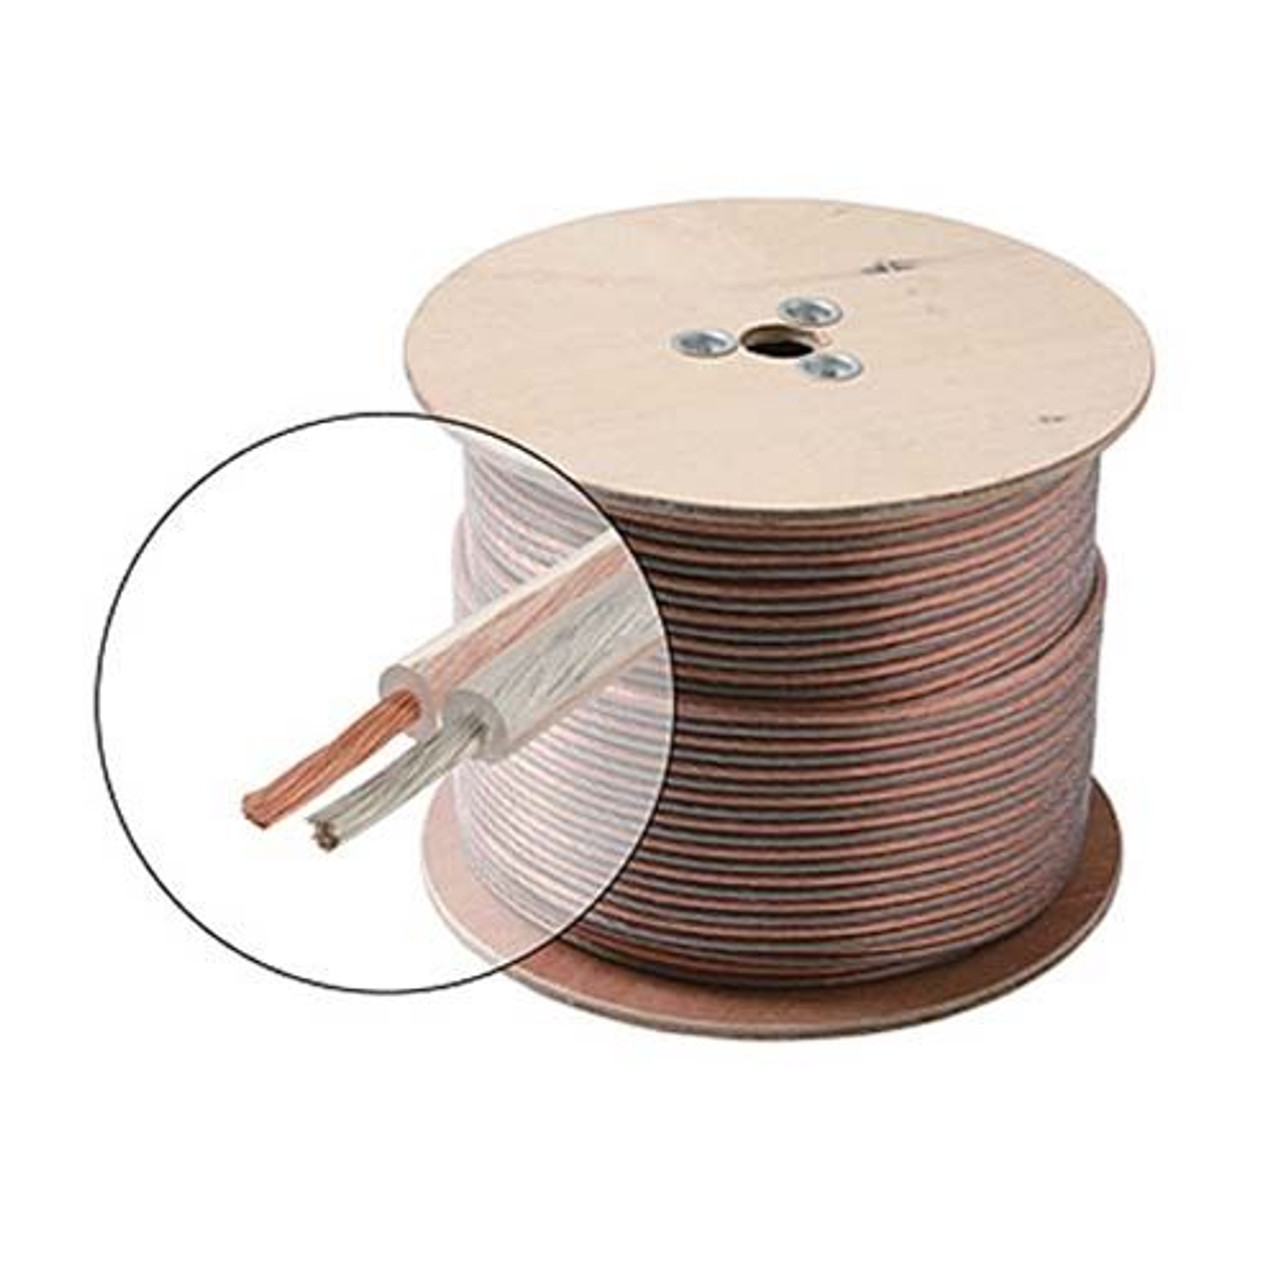 Eagle 250' FT 16 AWG GA Speaker Cable Wire 2 Conductor Copper Polarized Bulk High Performance Sound Quality Oxygen Free Audio Speaker Cable Stranded Flexible